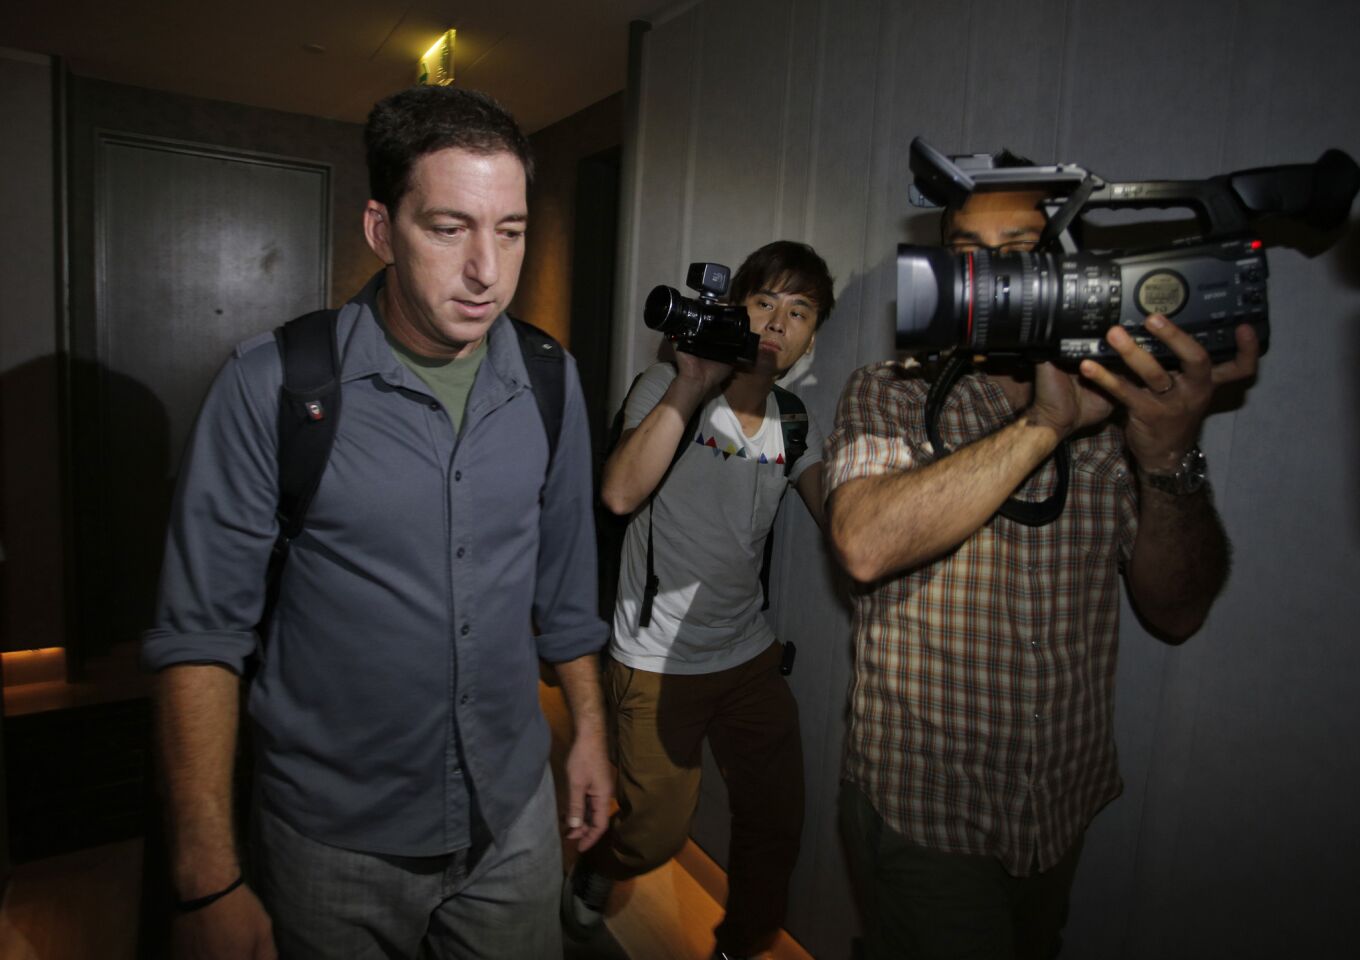 Glenn Greenwald, left, one of the reporters who broken the Edward Snowden leaks, walks out from his hotel room in Hong Kong.